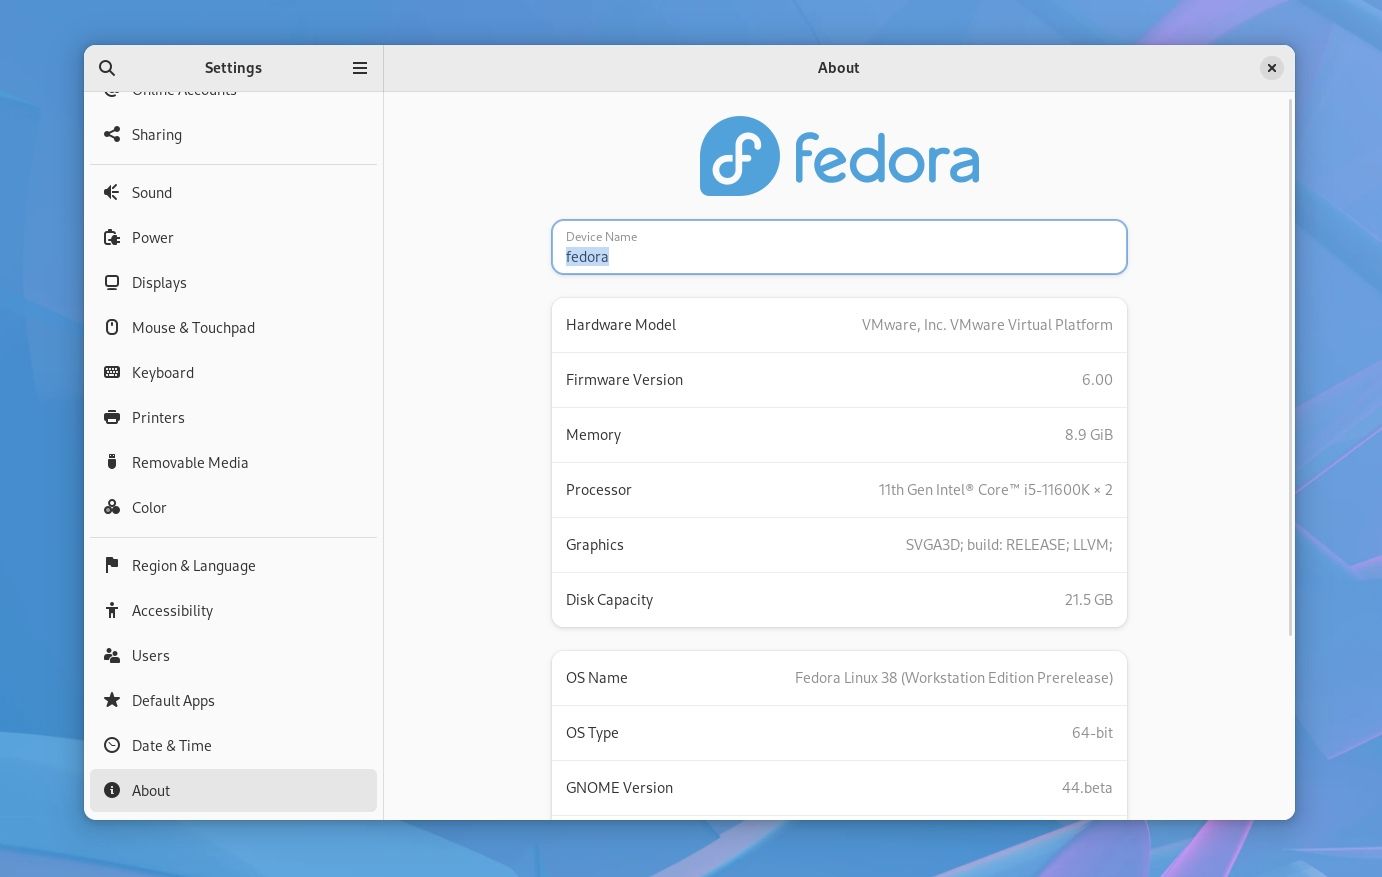 fedora 38 pre release about info